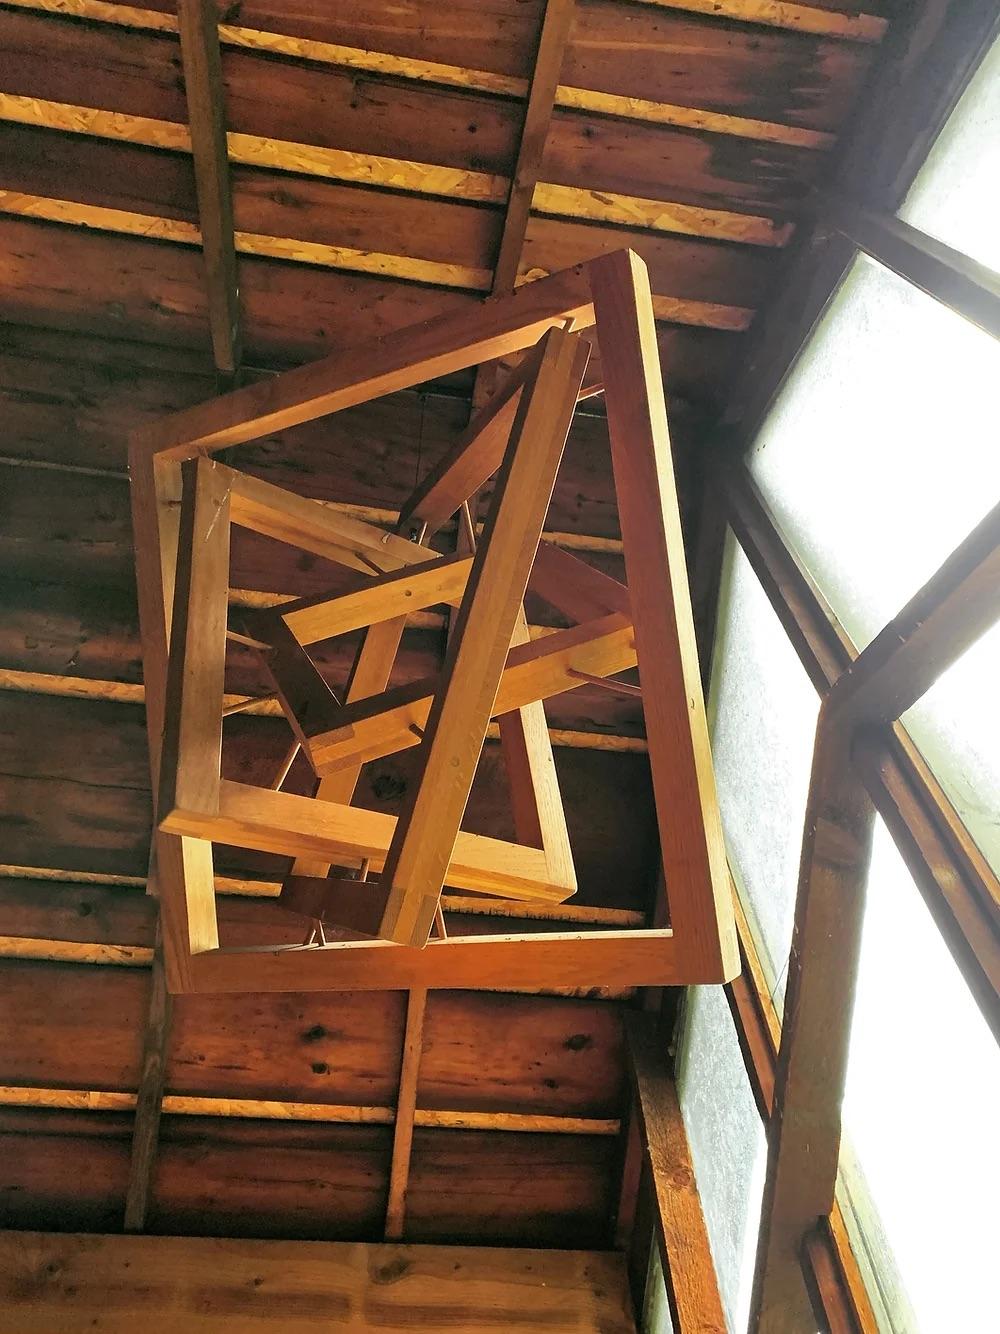 A unique hanging sculpture consisting of 4 interlocking squares set at random angles held in place with dowels. This piece was bought from mid century modern designer Hugh Acton's estate where it hung from loft beams in his barn (see photos). Acton